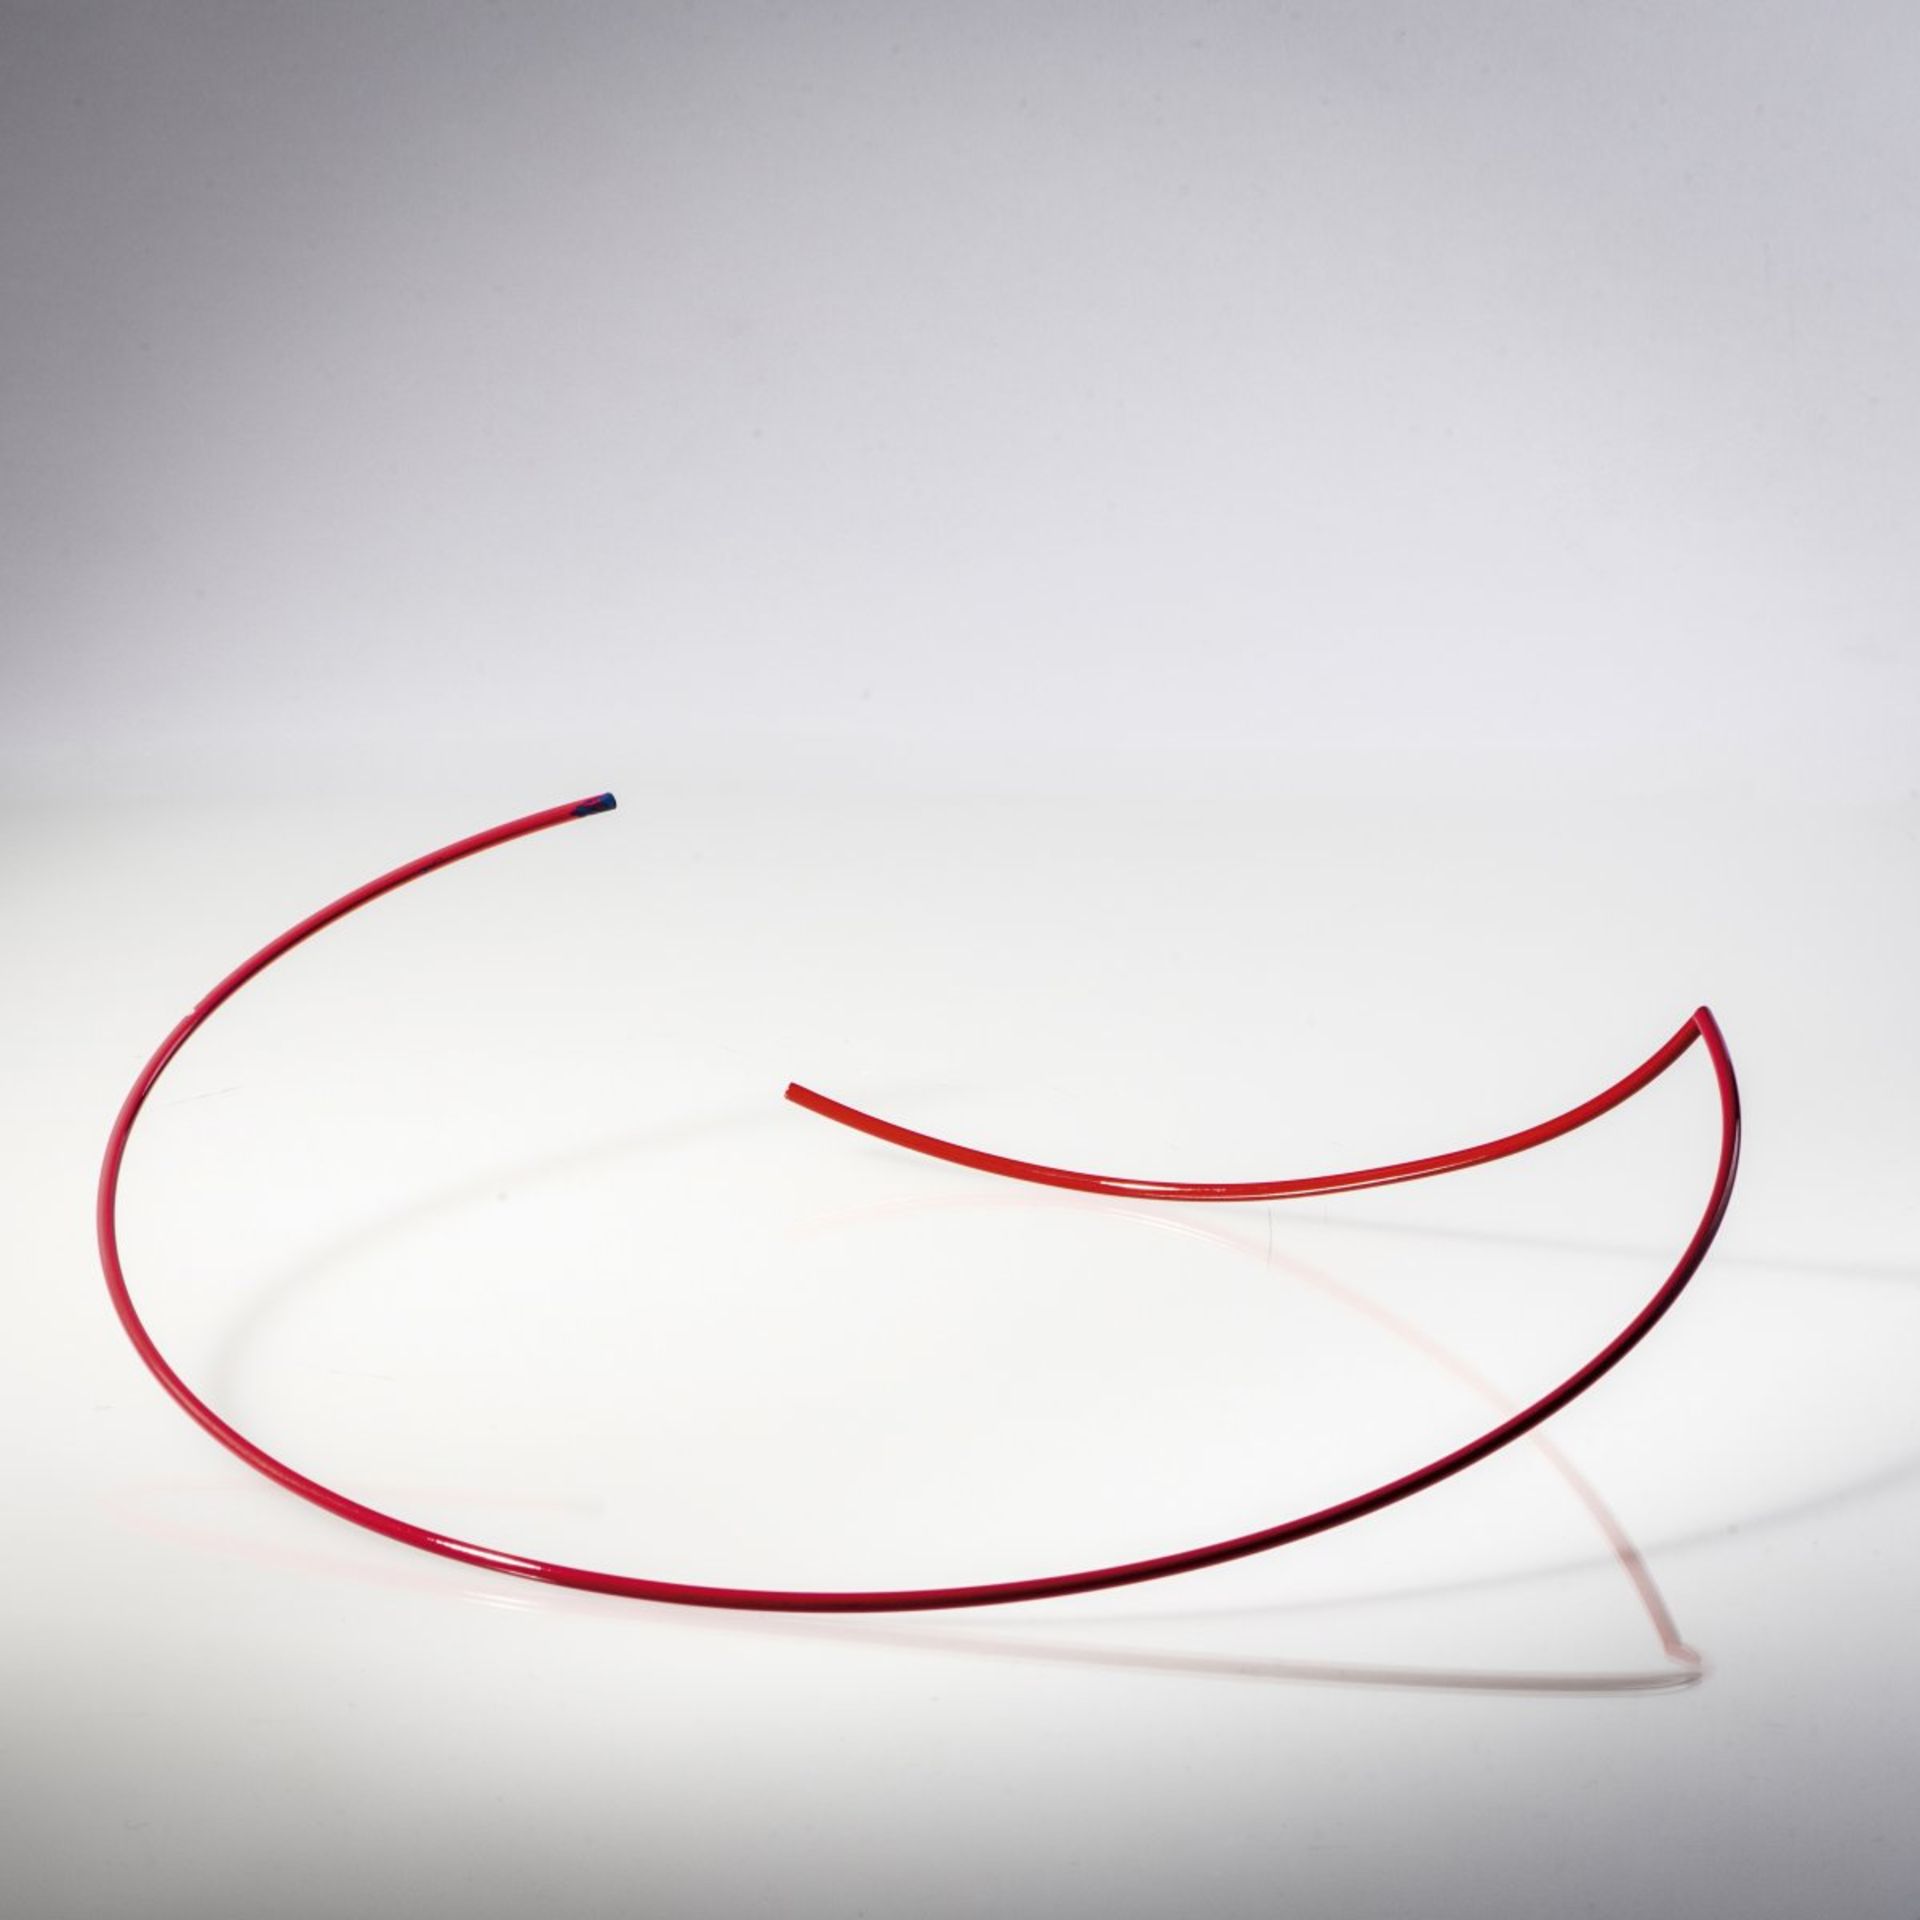 Herman Hermsen, Necklace, 1982Necklace, 1982Wire, painted red. 44 grams. Ø 26 cm. Unsigned.From